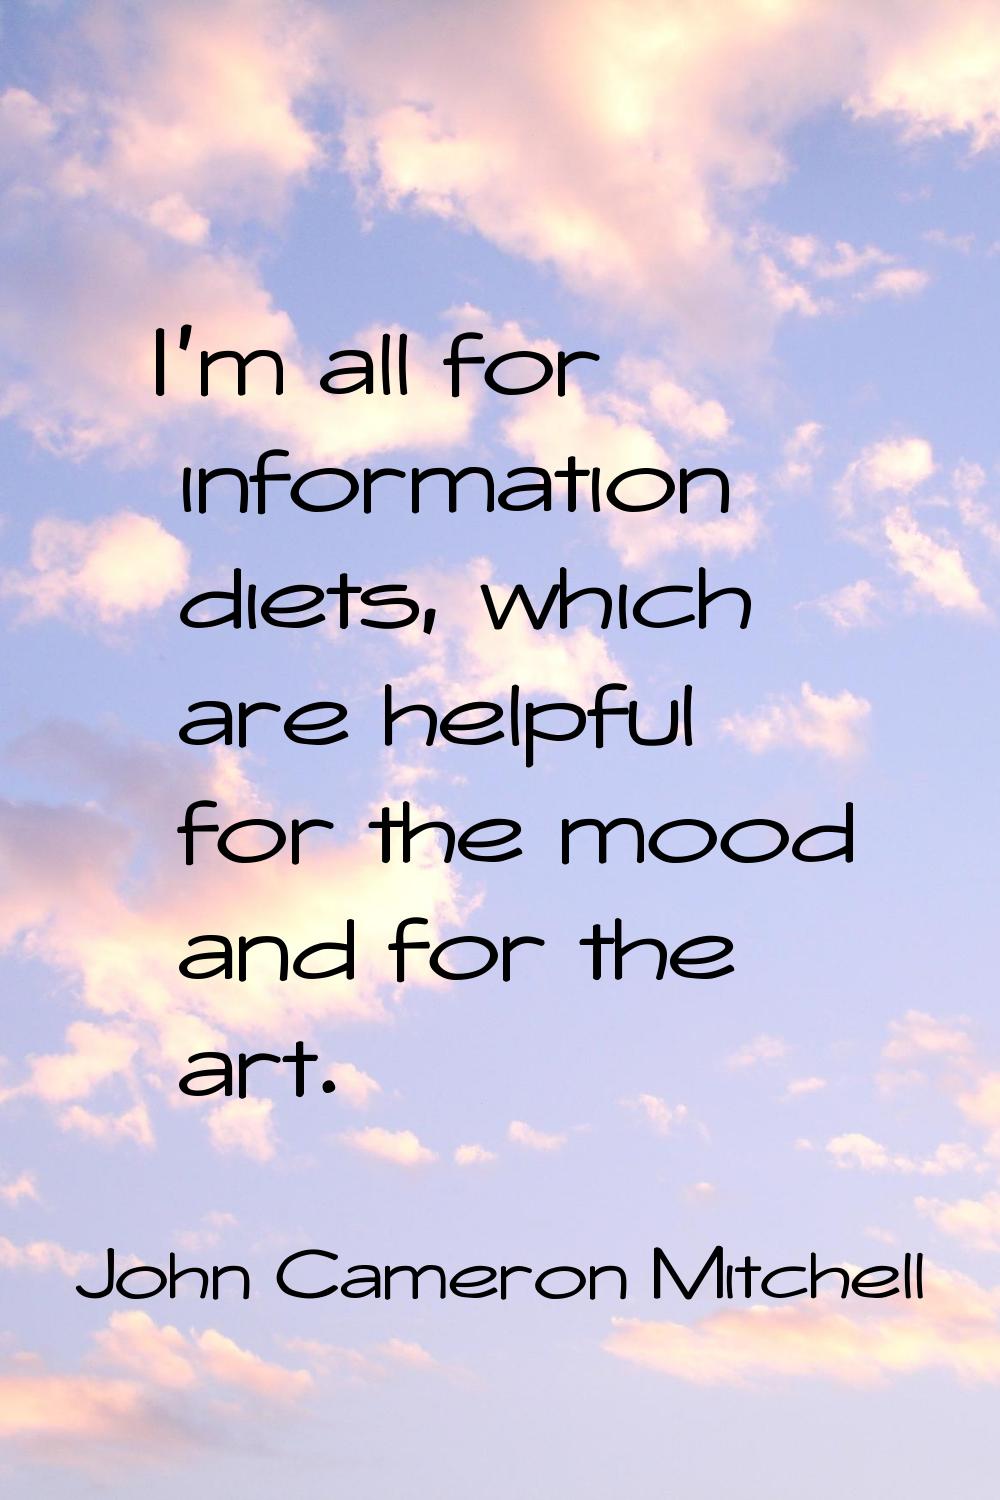 I'm all for information diets, which are helpful for the mood and for the art.